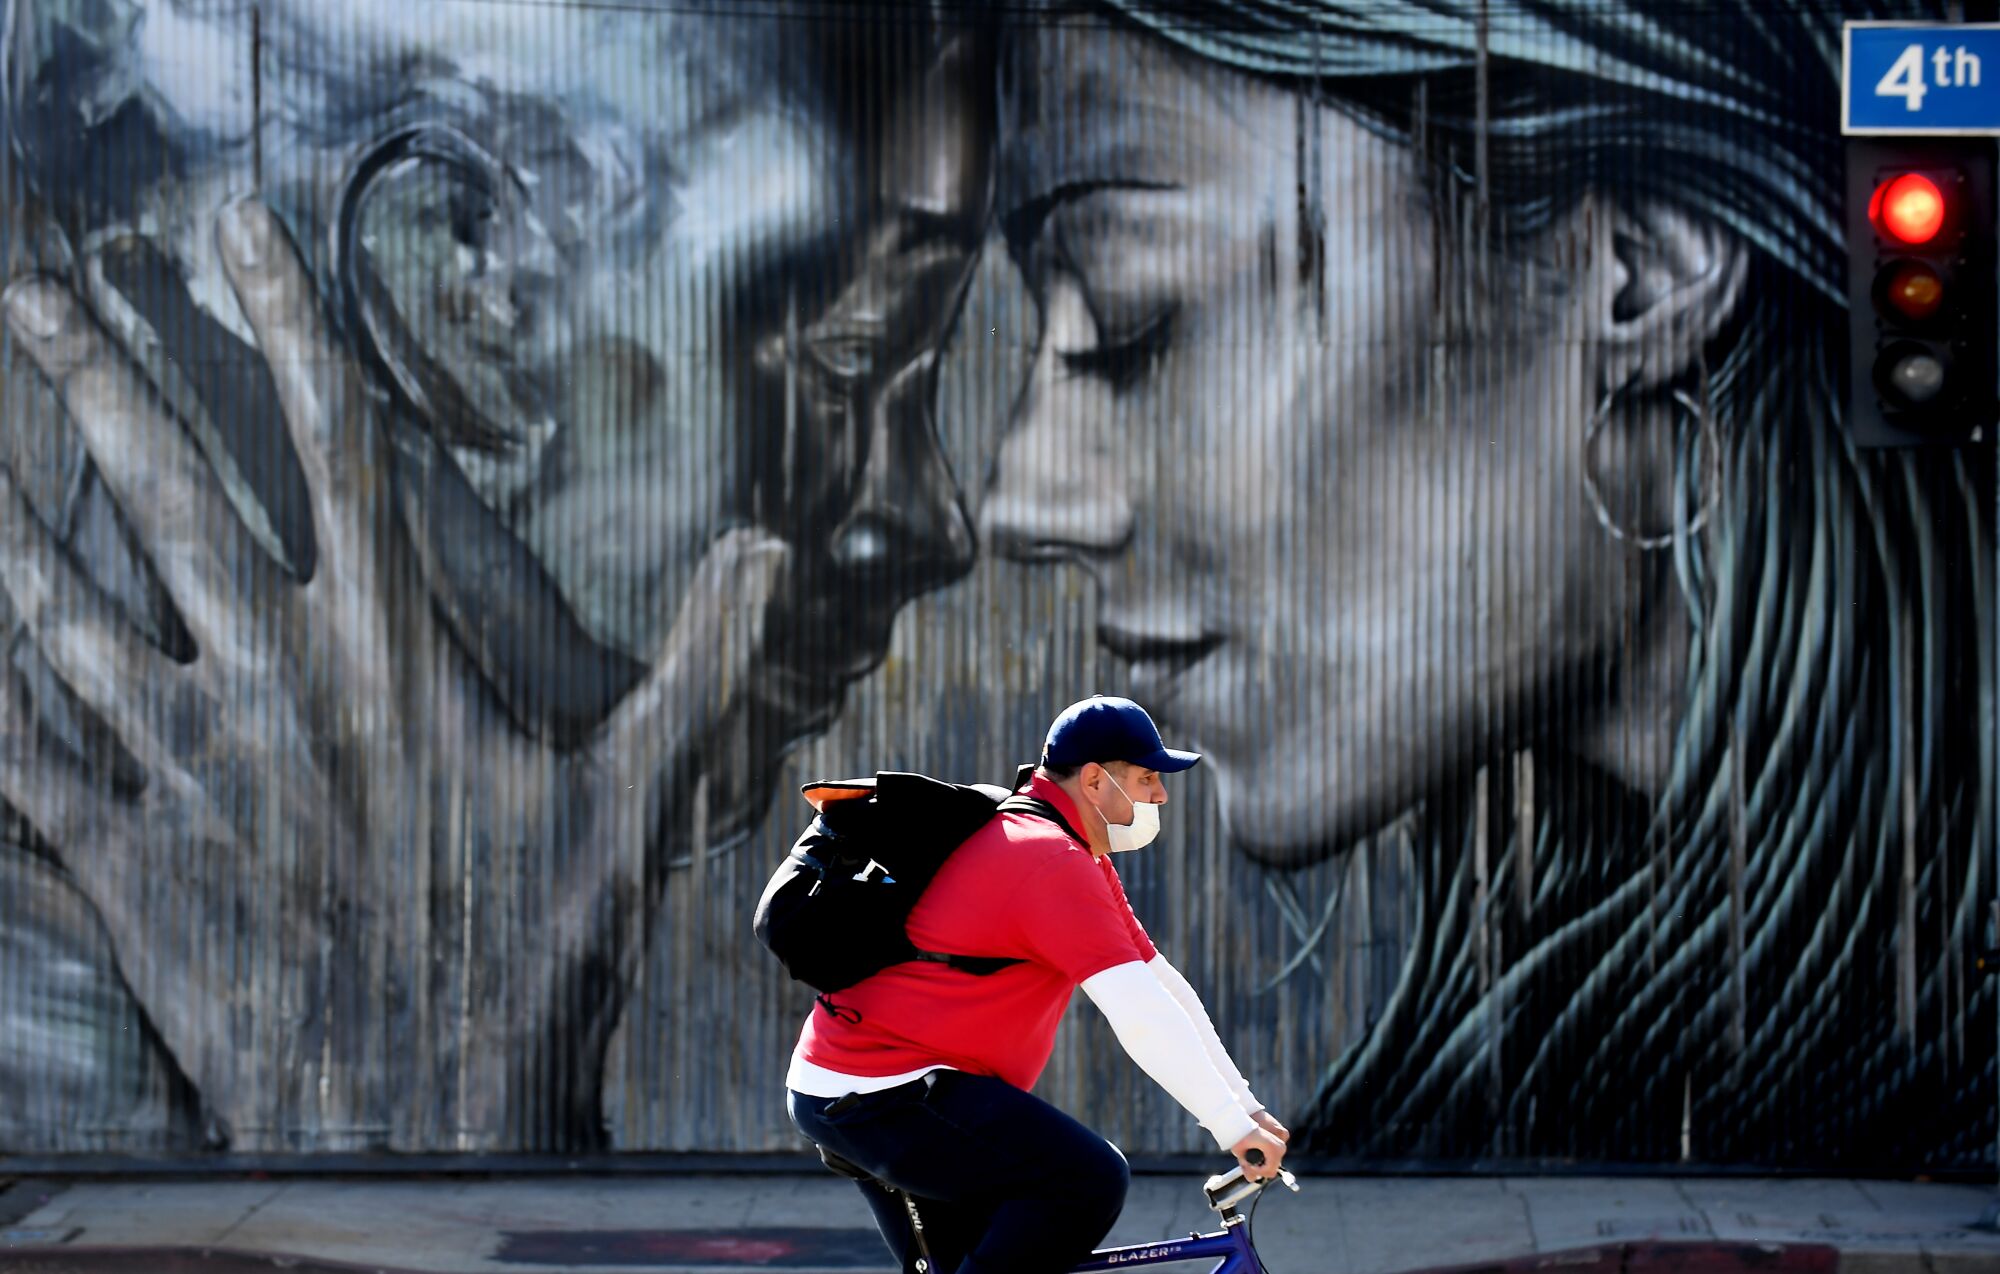 A man rides his bike along 4th Street in Los Angeles with a mural of two people behind him.